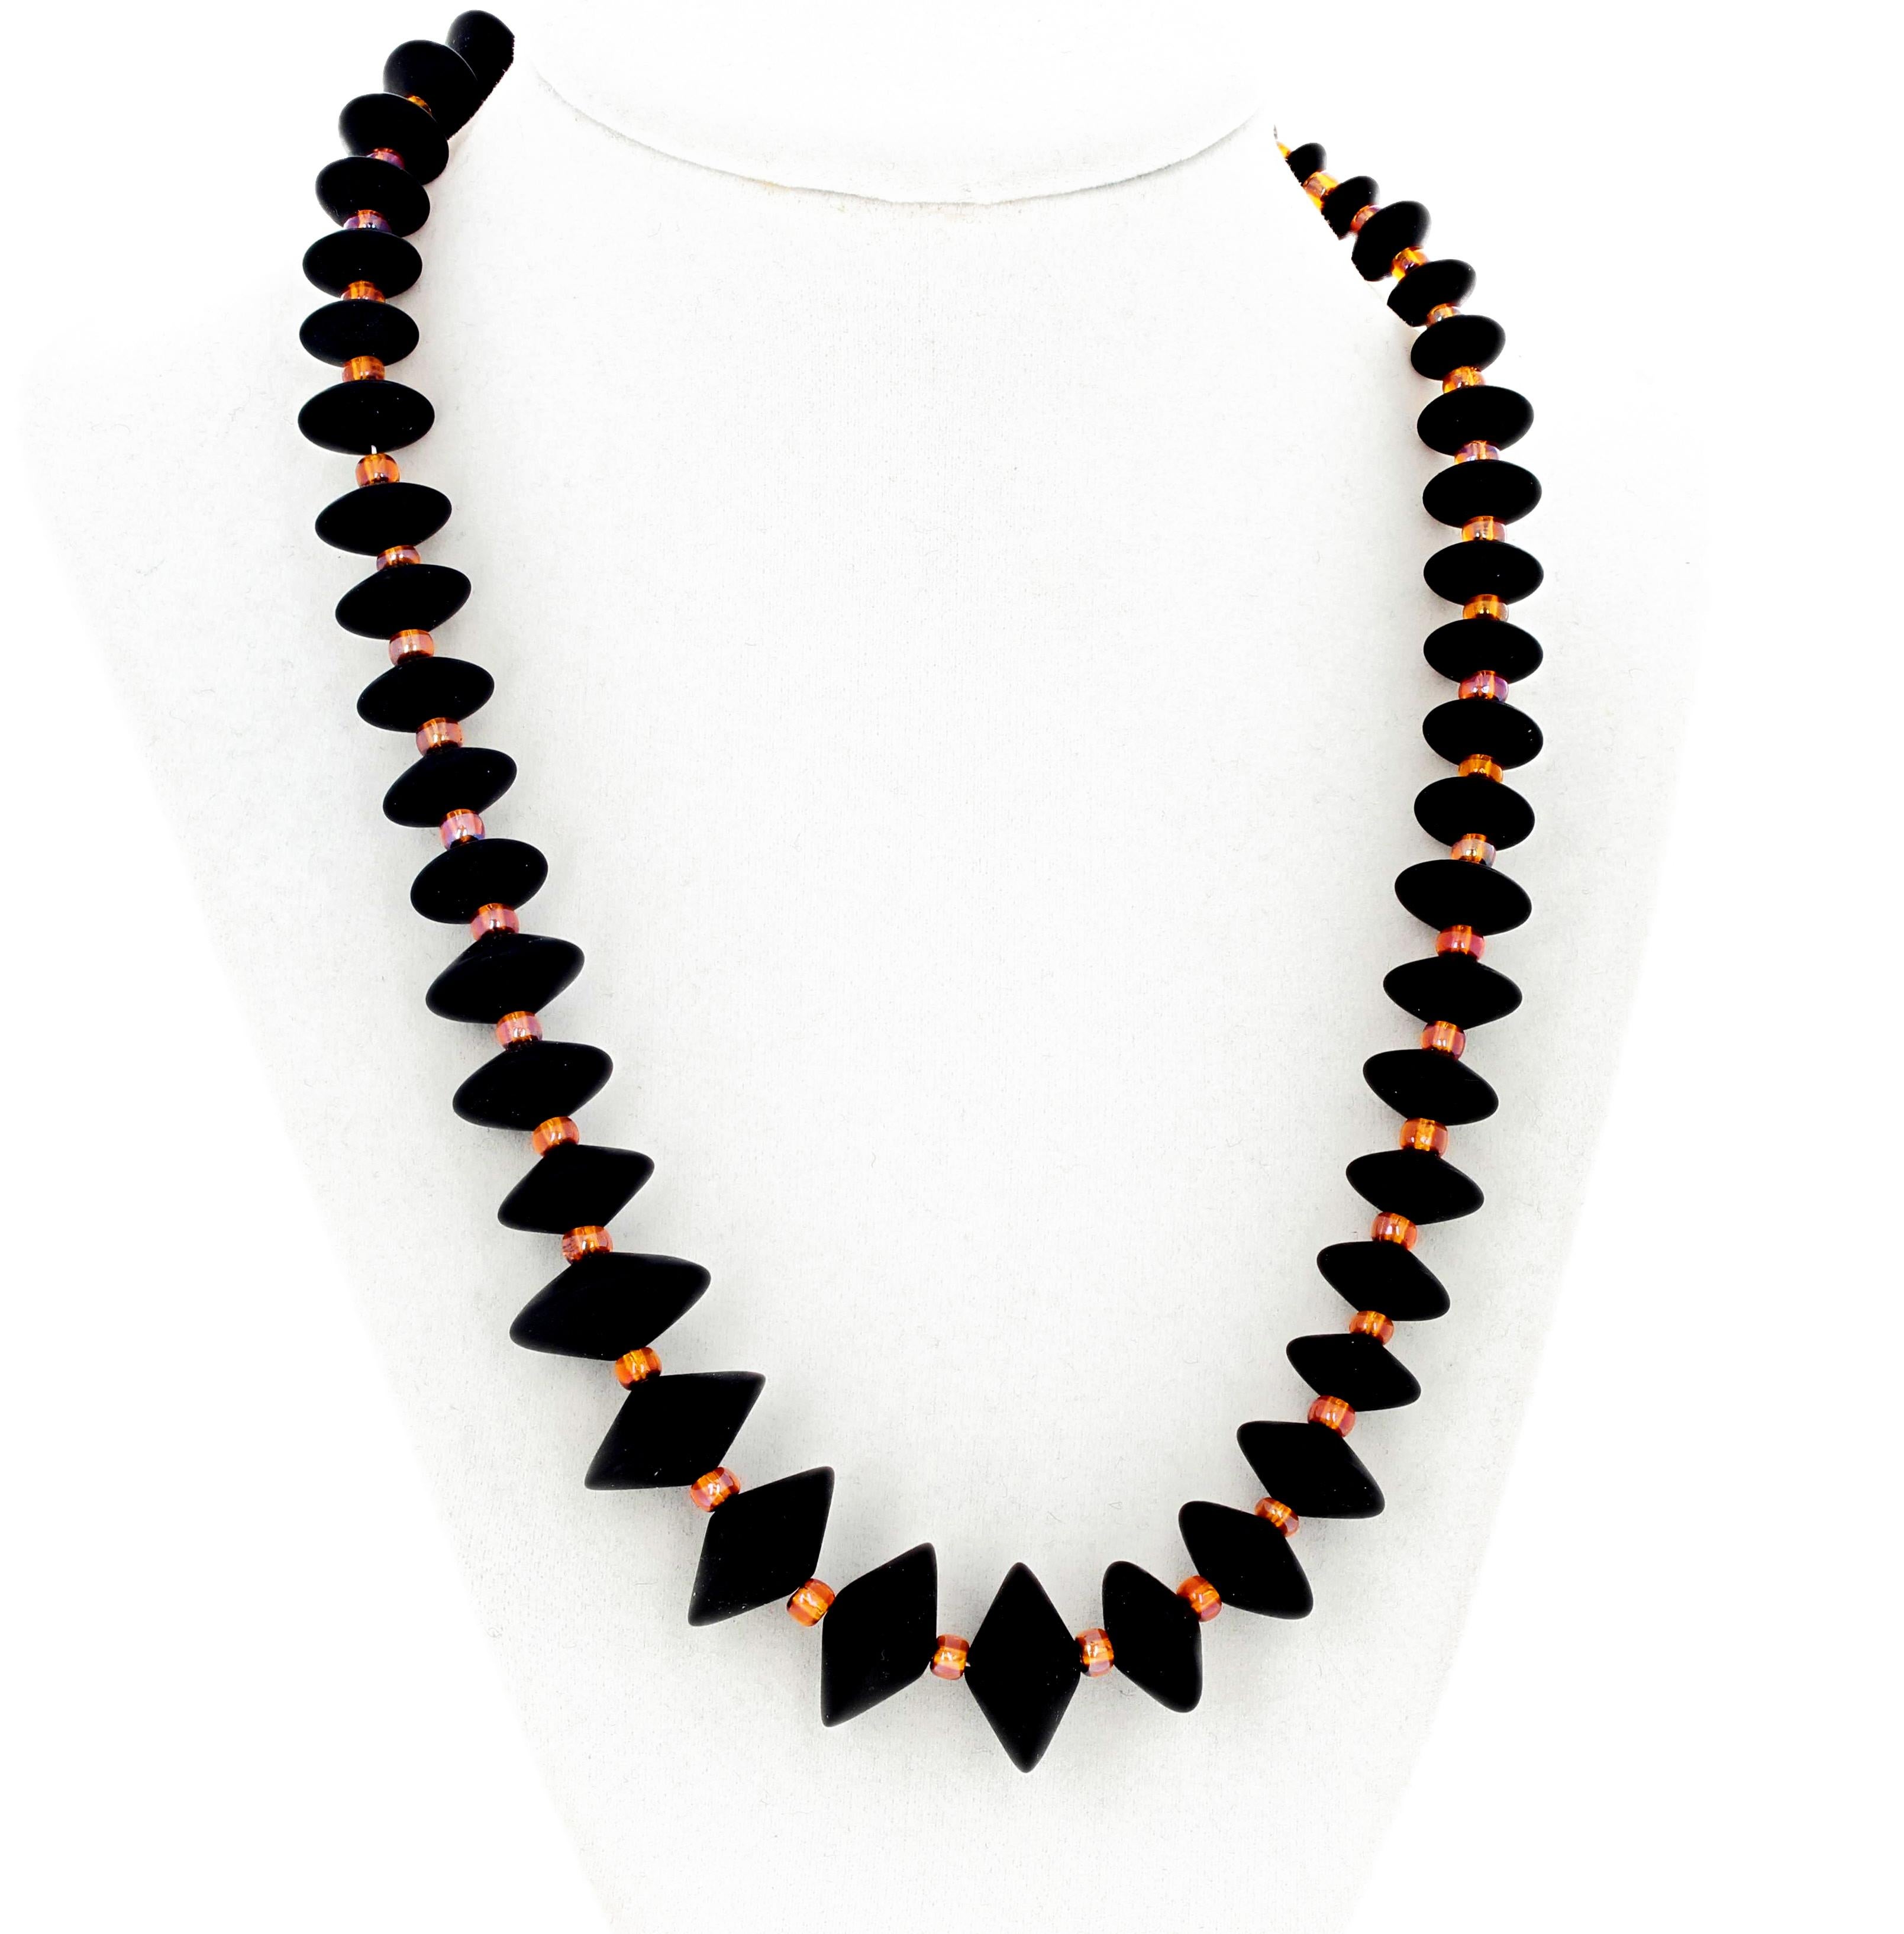 Unique real Black Onyx (largest 20 mm) enhanced with glittering goldy-orangy Czech crystals 19.5 inch long necklace with gold tone clasp.  This is truly elegant on a blouse or sweater.